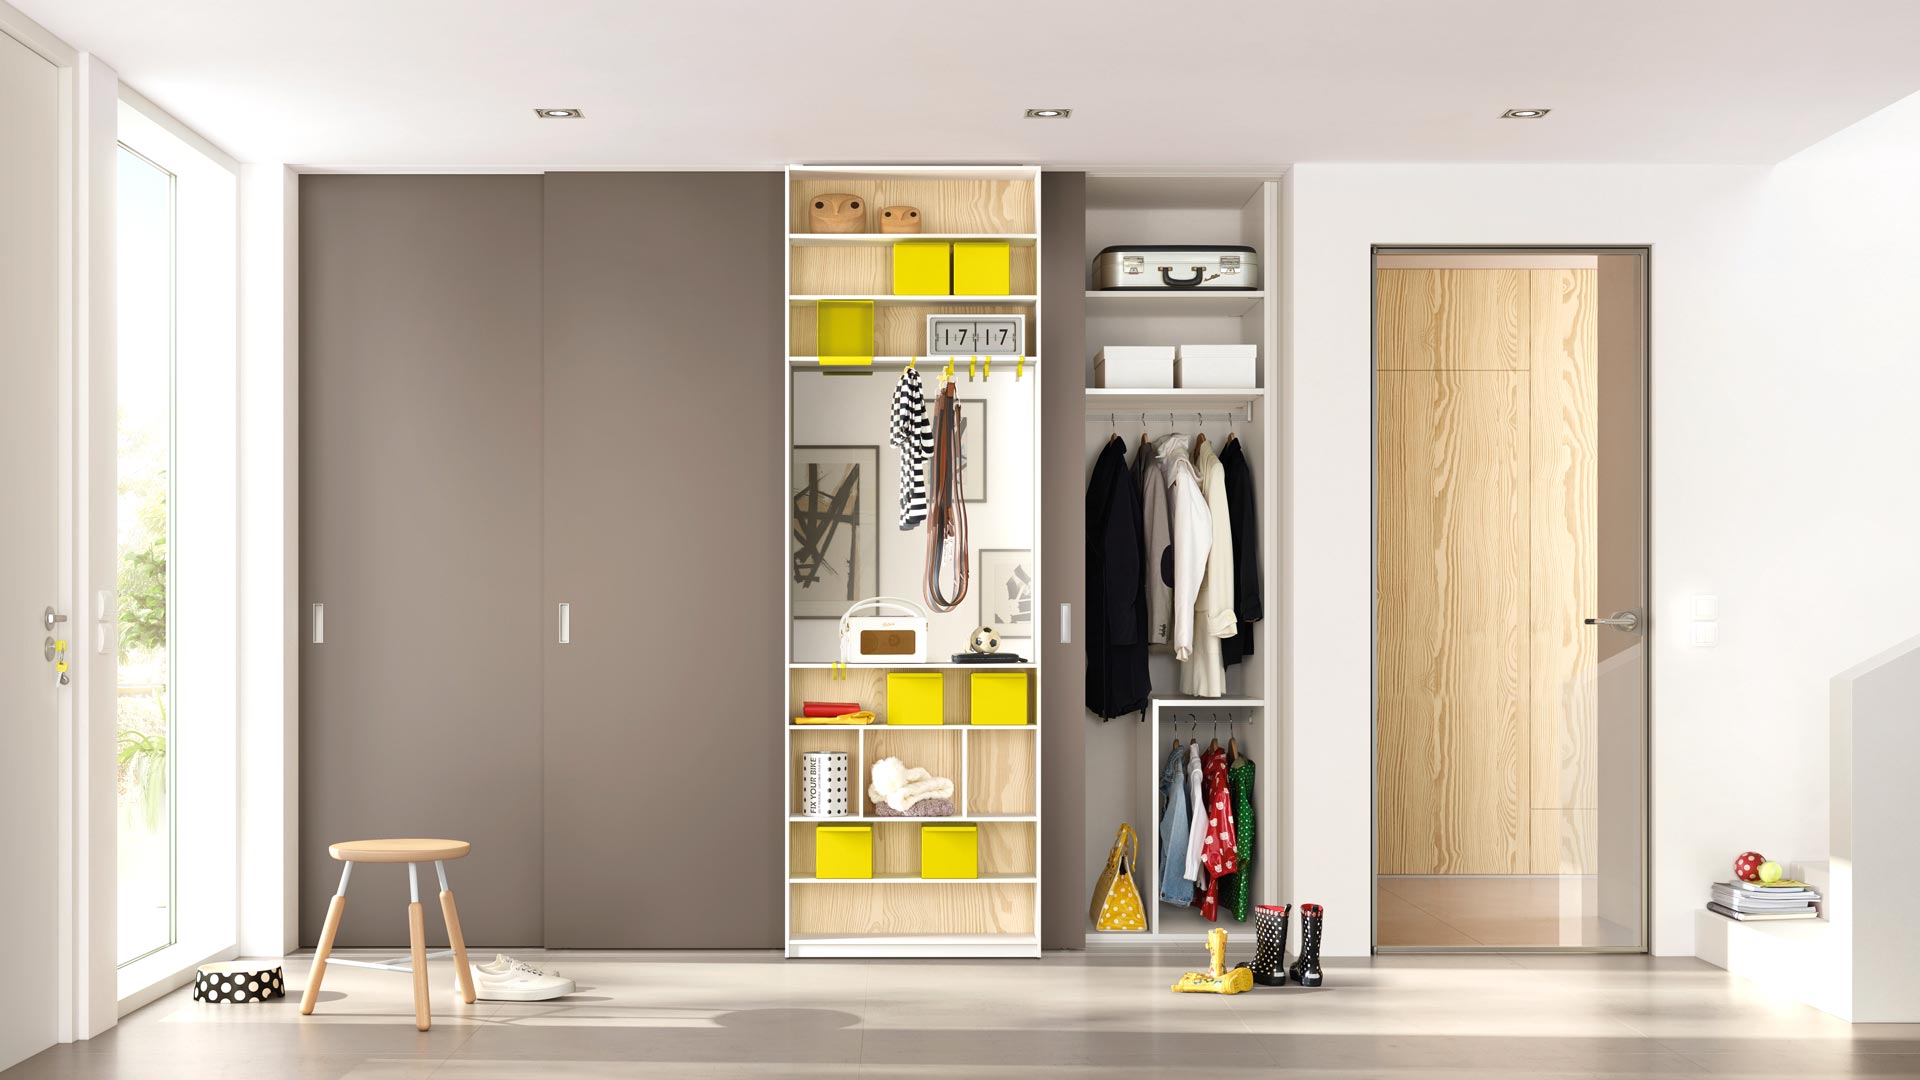 Sliding doors – excellent functionality and efficiently used space